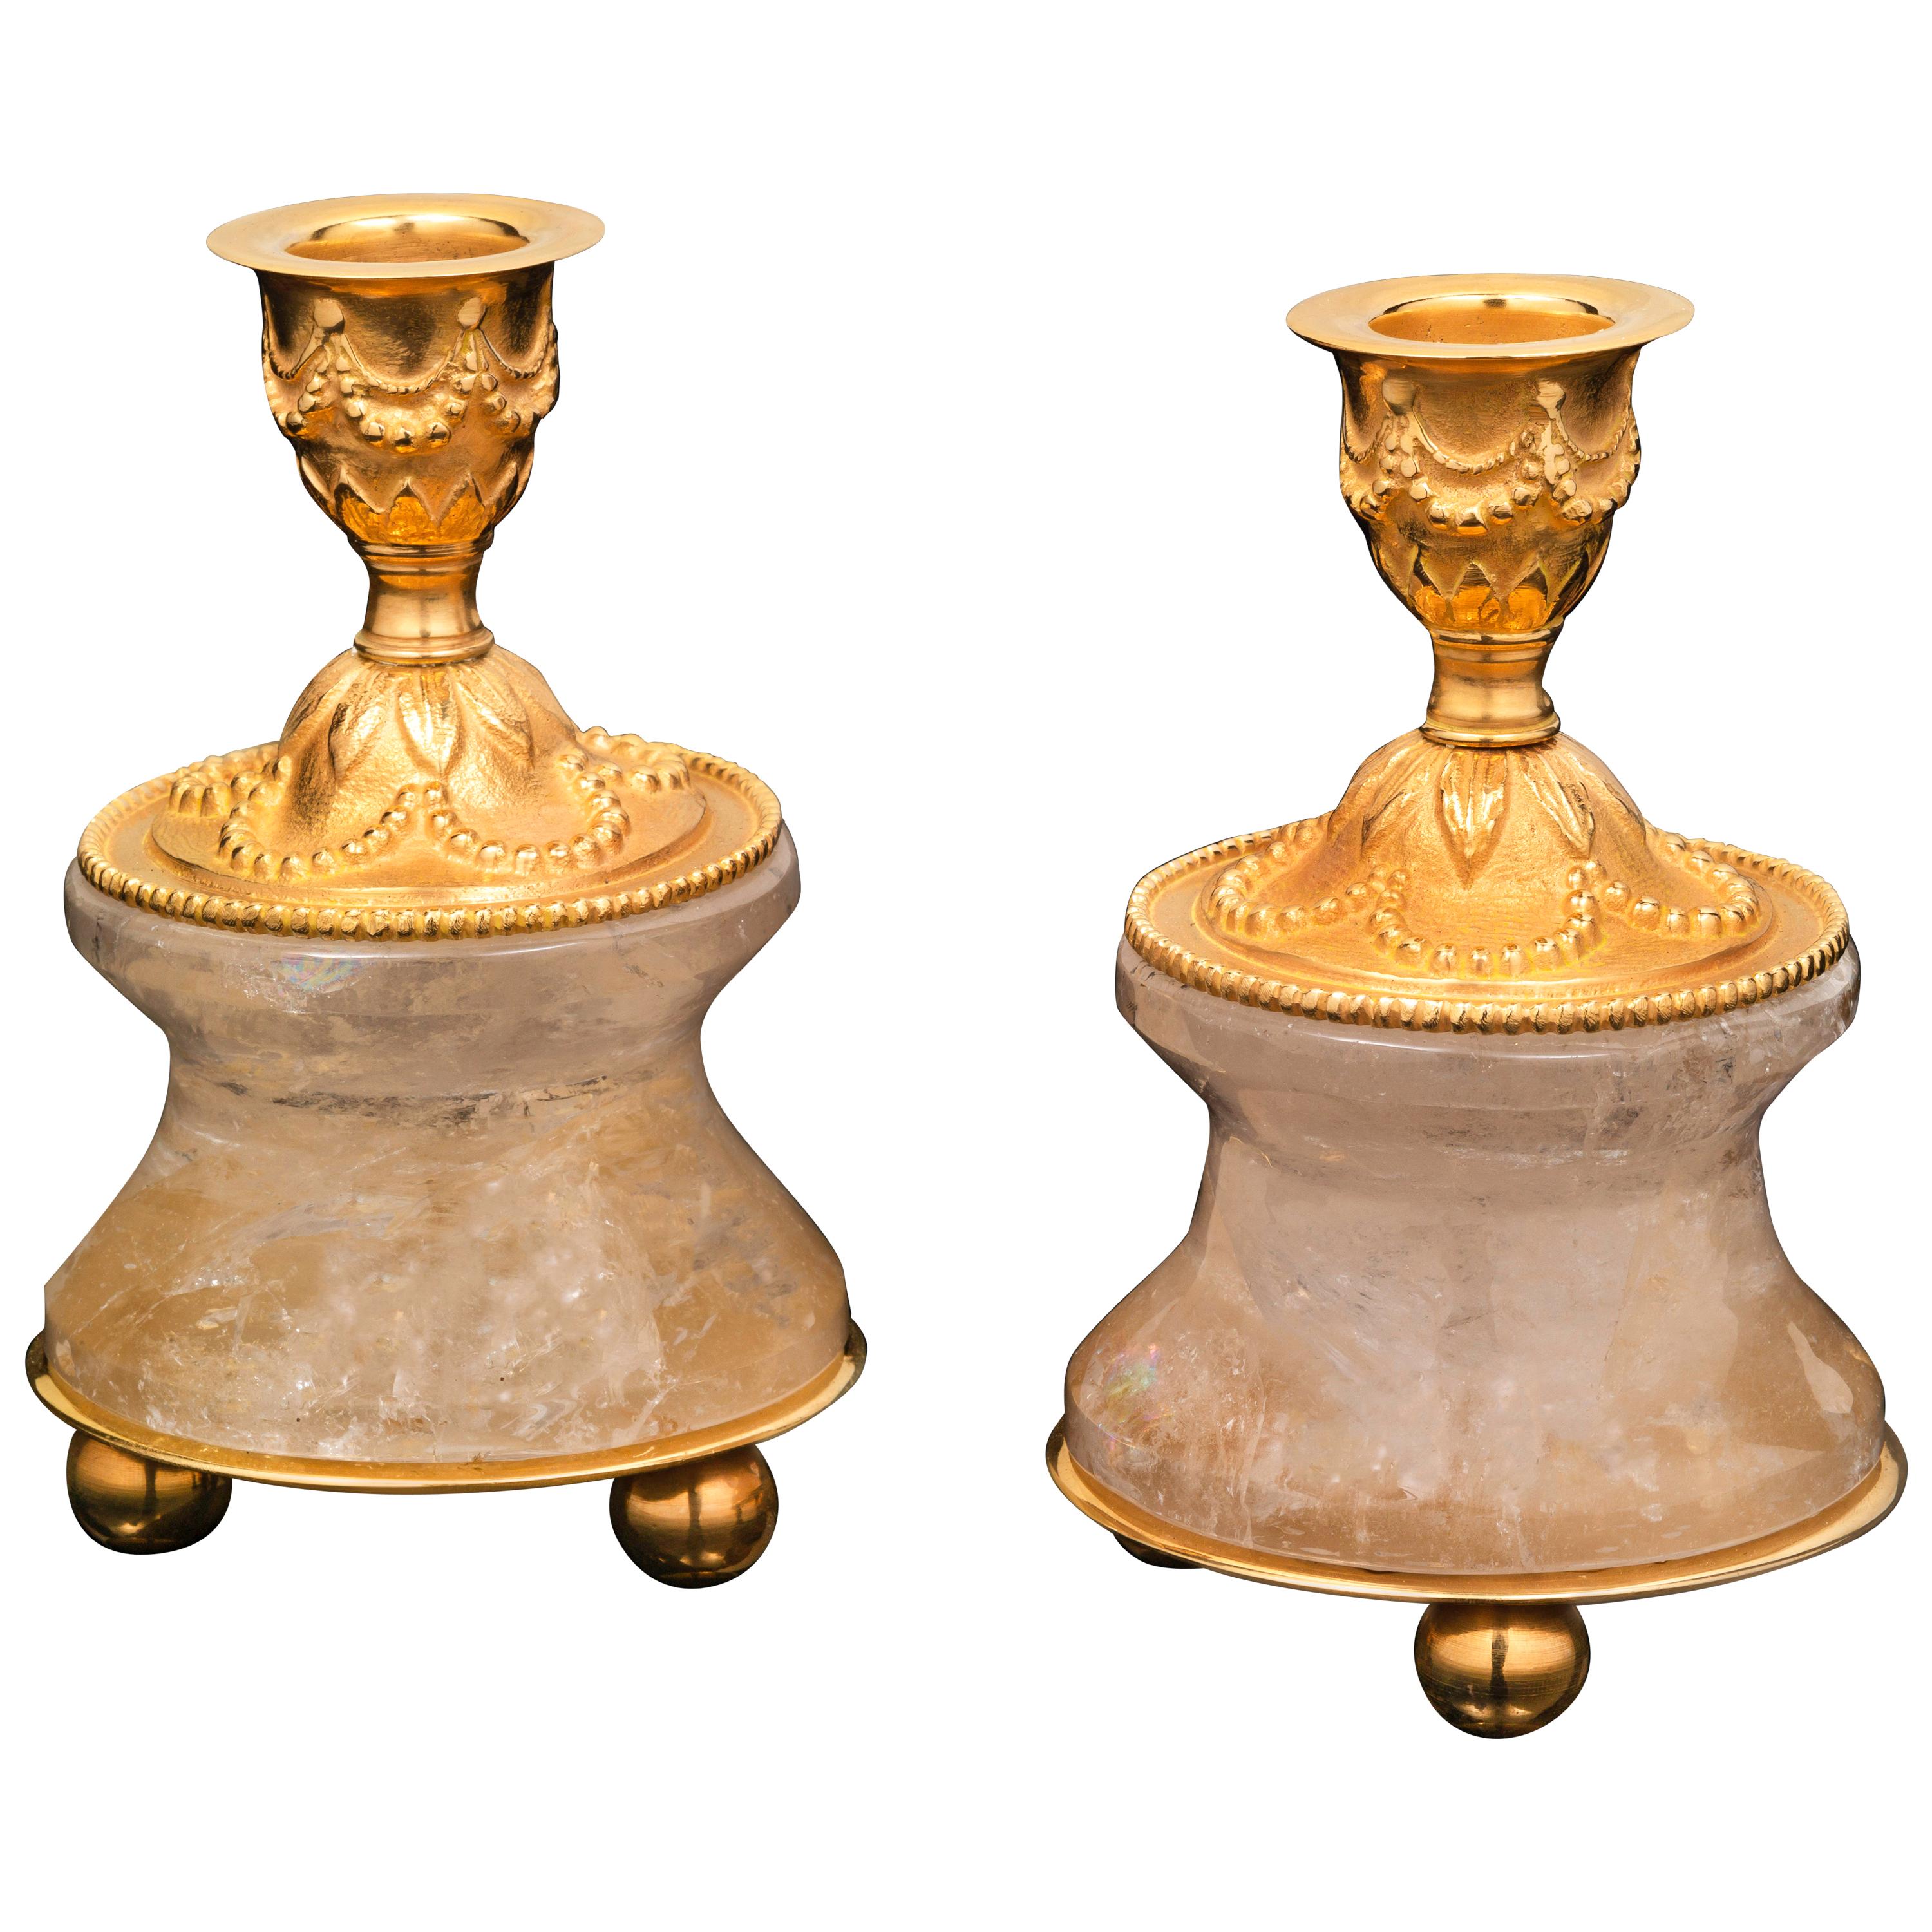 Pair of Rock Crystal and Gilt-Bronze Lamps /Candlesticks Louis XVI Style